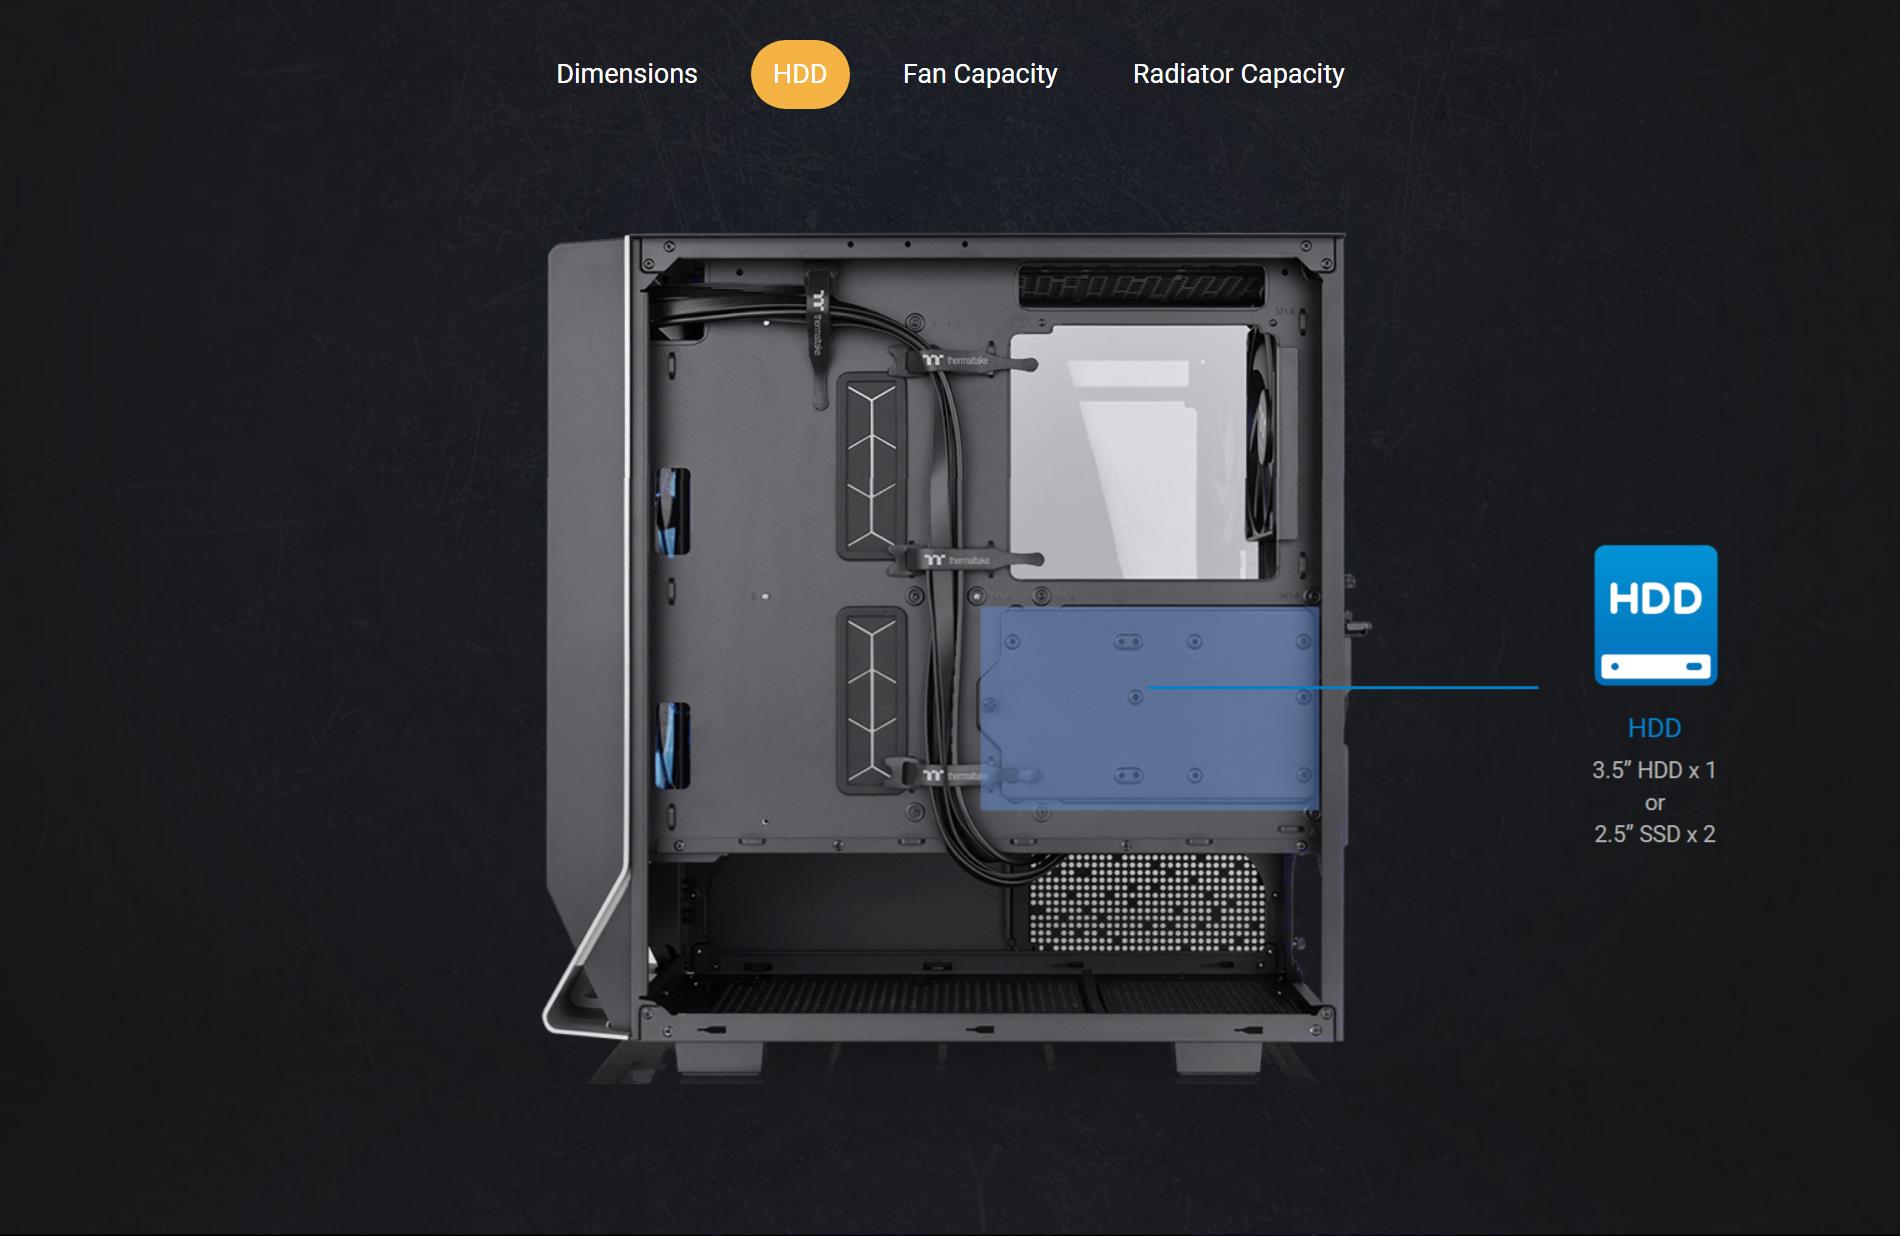 A large marketing image providing additional information about the product Thermaltake Ceres 300 TG - ARGB Mid Tower Case (Black) - Additional alt info not provided